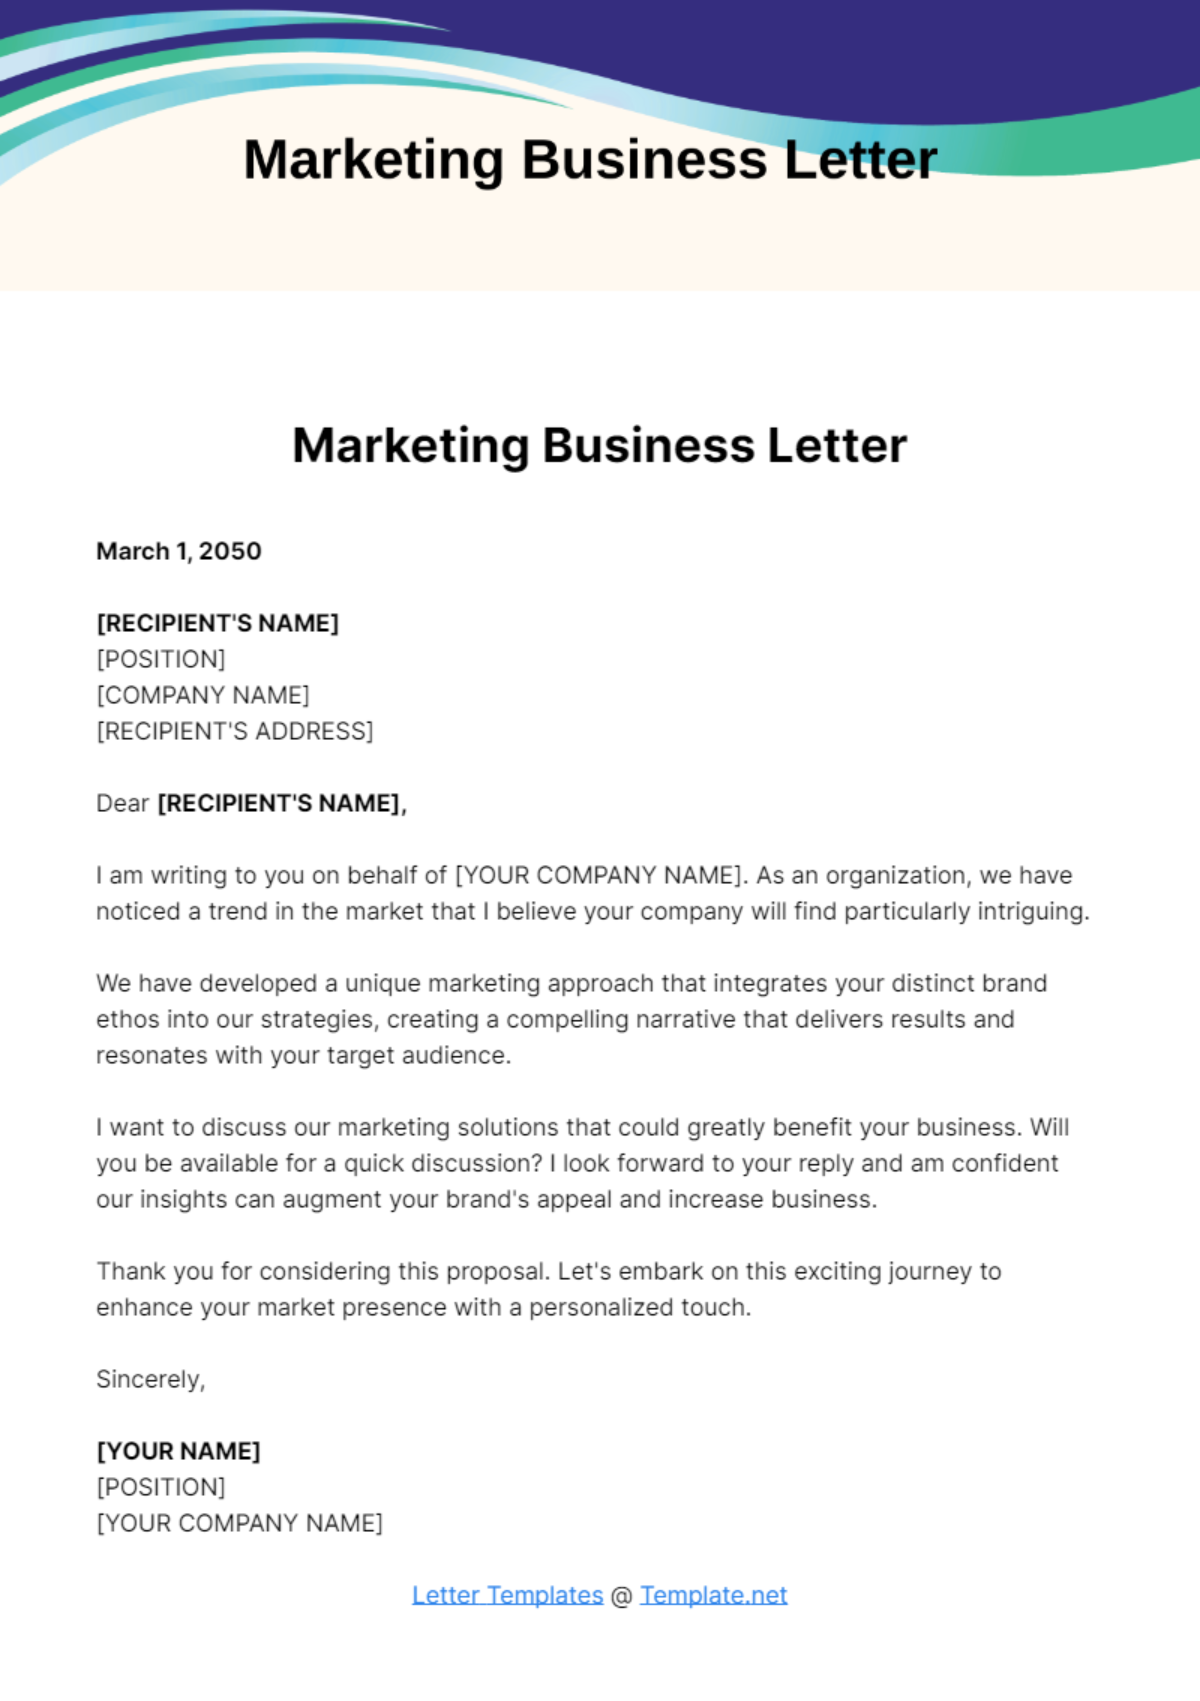 Free Marketing Business Letter Template